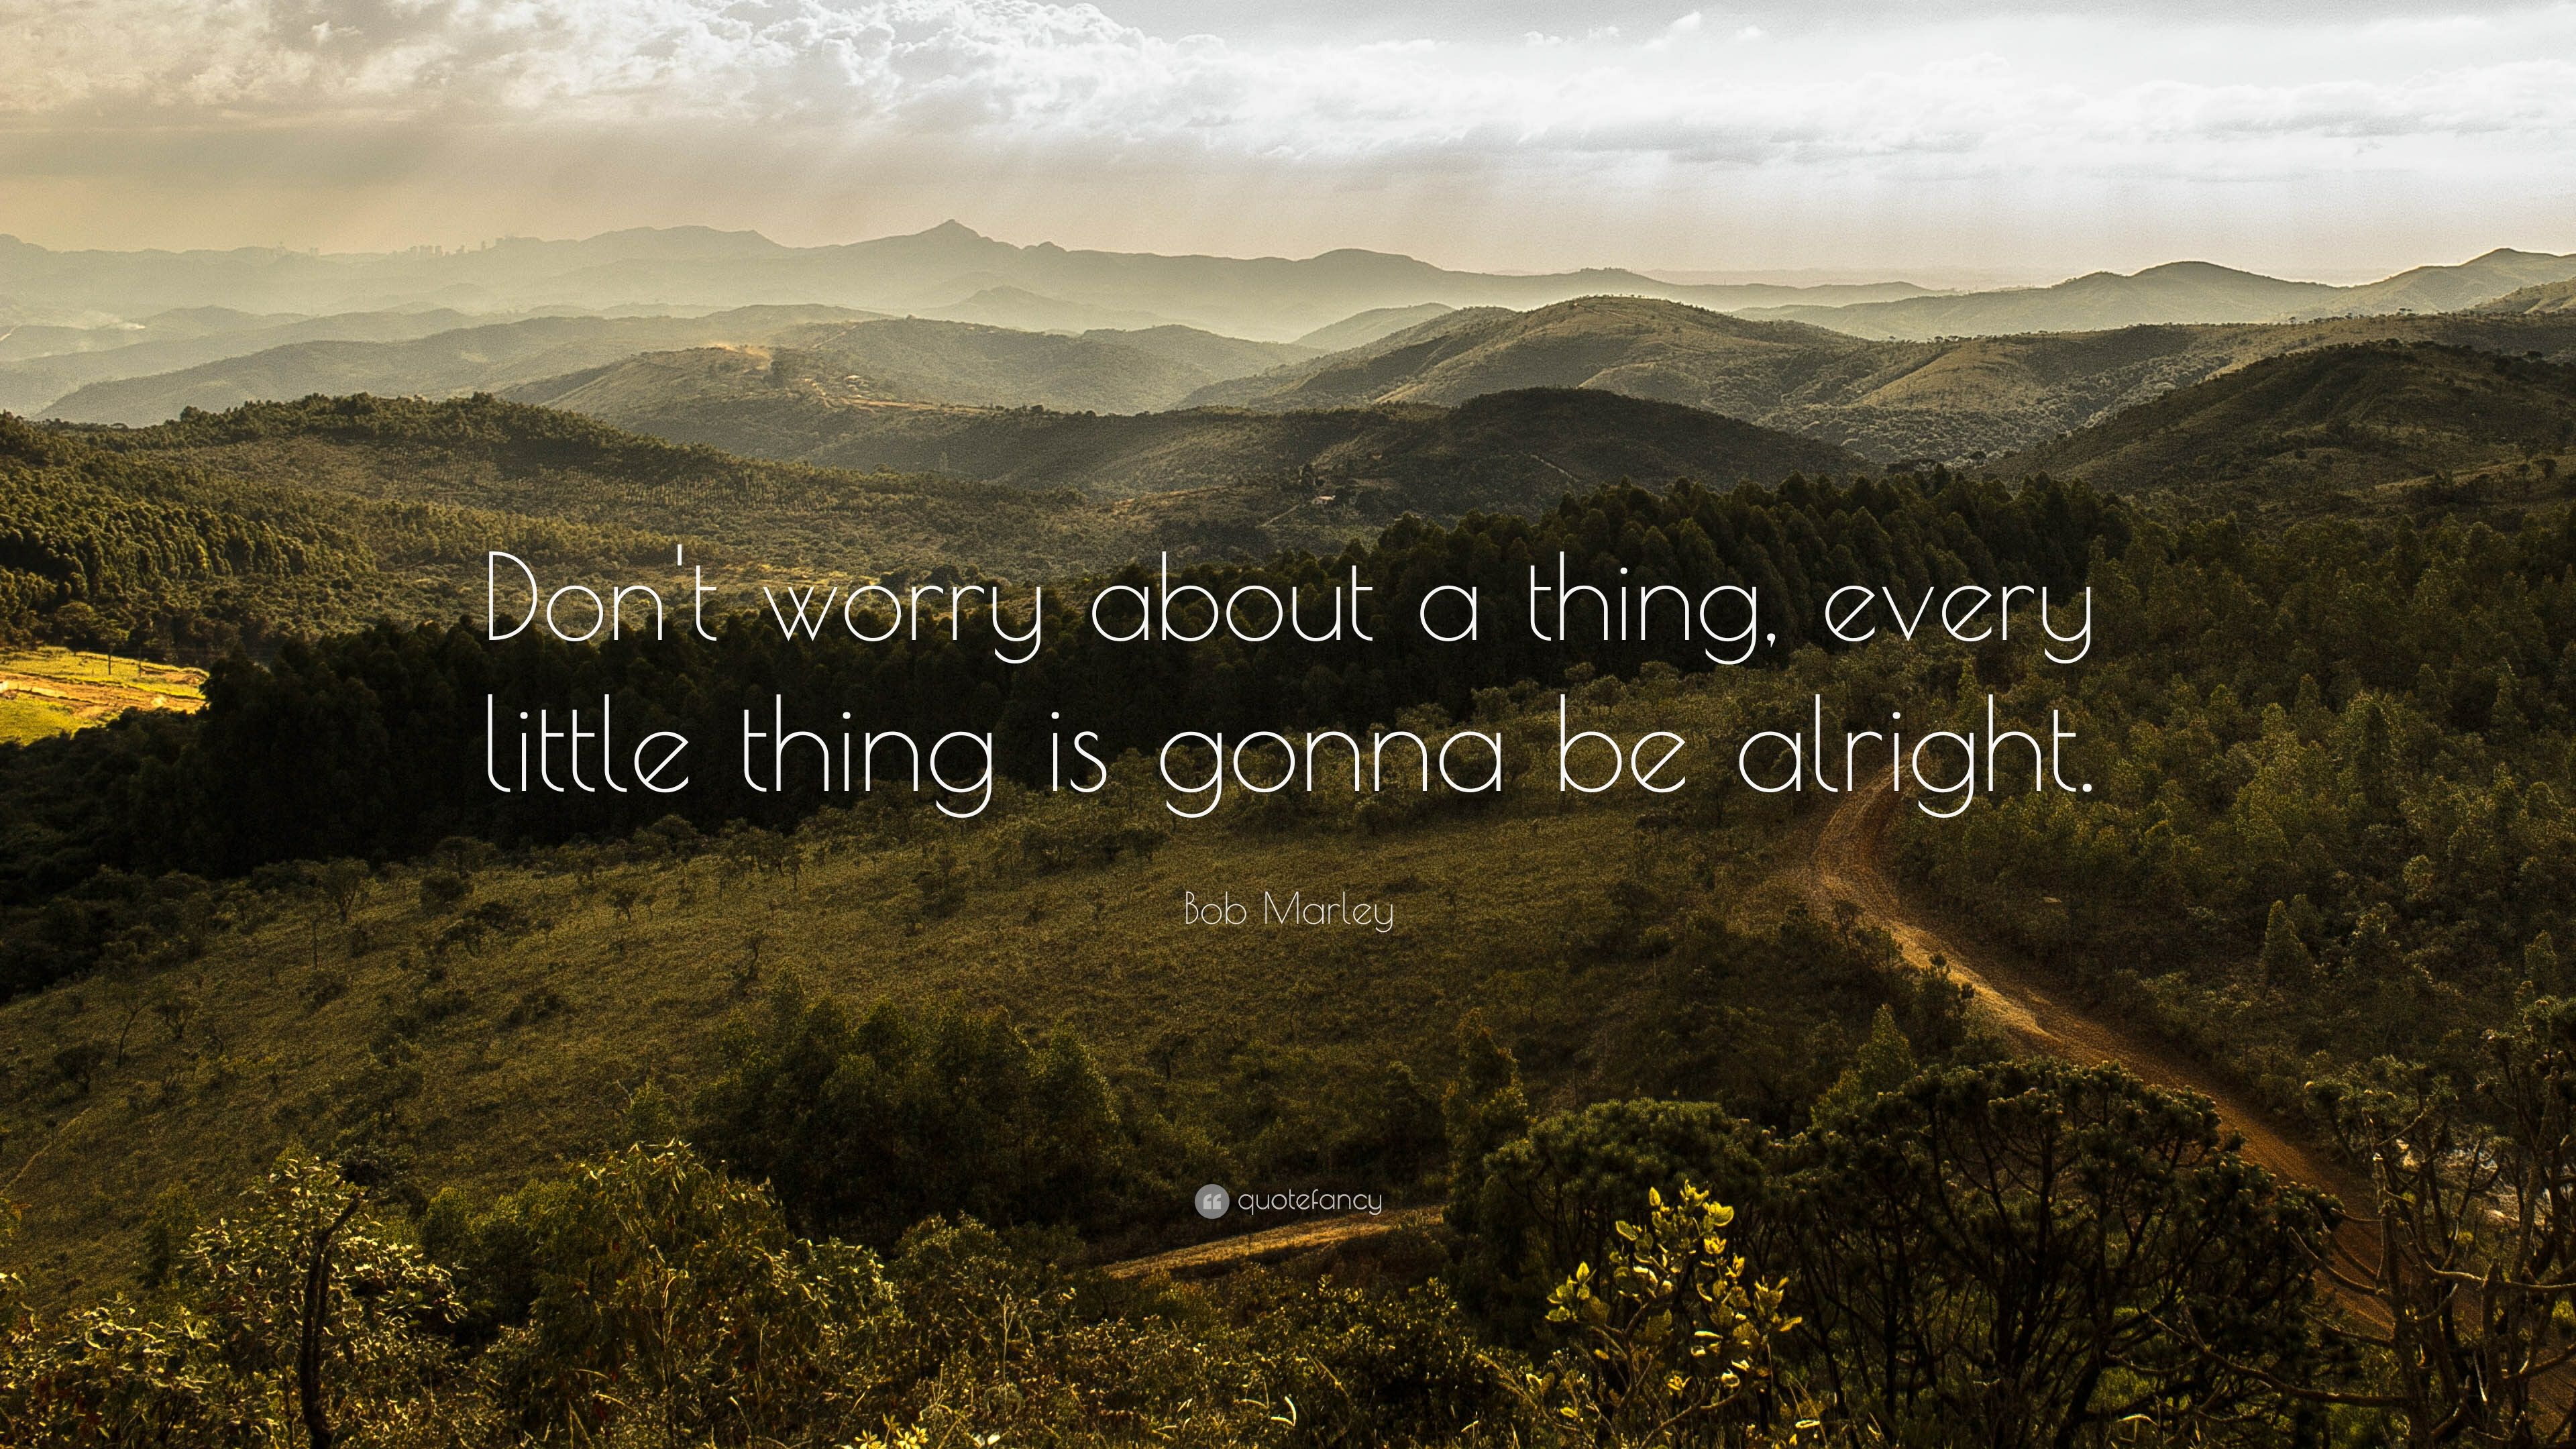 Bob Marley Quote: “Don't worry about a thing, every little thing is gonna be alright.” (24 wallpaper)